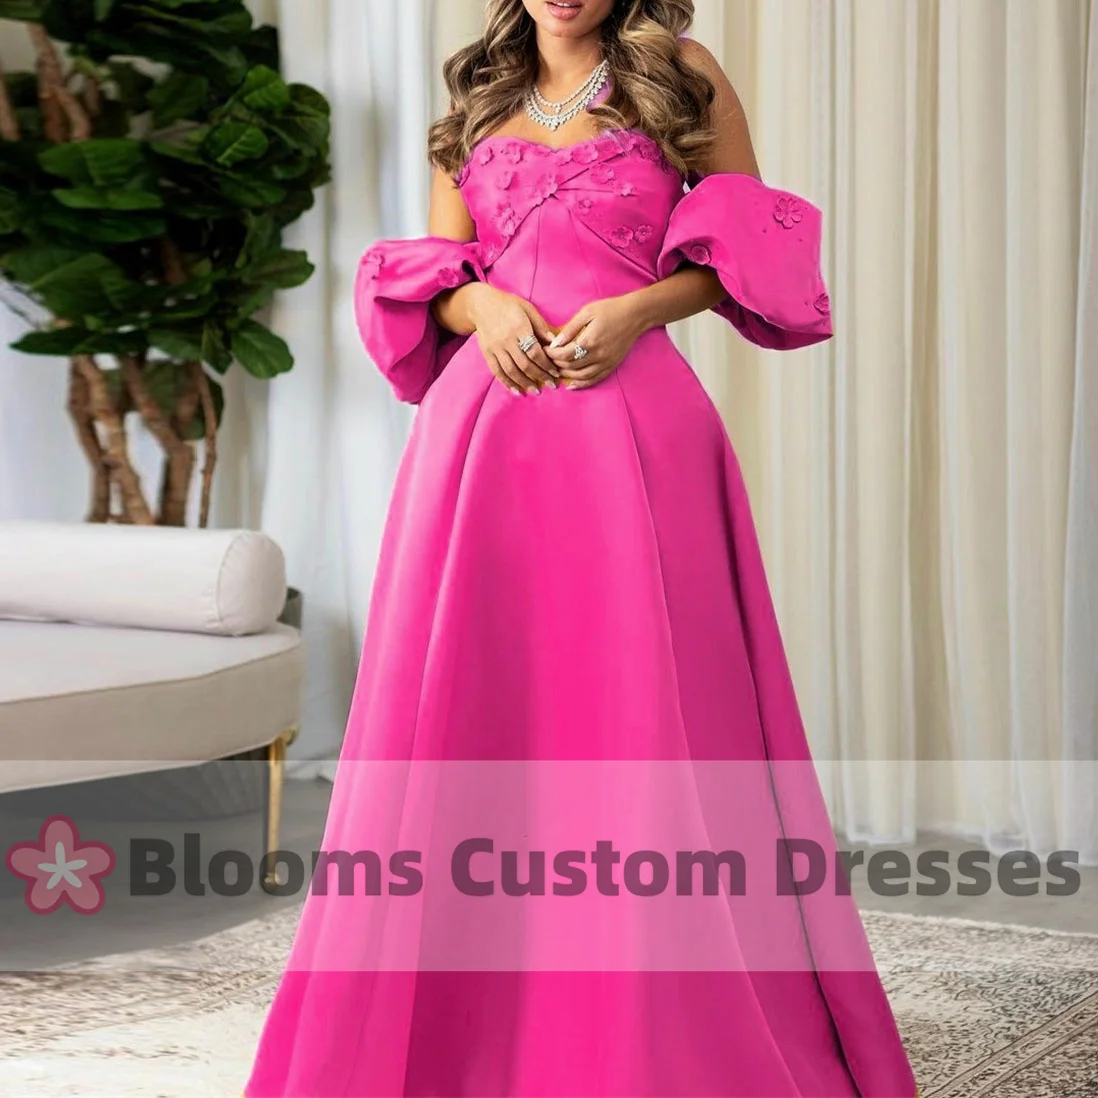 

Blooms Gorgeous Satin Flowers Long Evening Dresses Puff Sleeves A-Line Lace-up Custom Prom Dress Wedding Formal Occasion Gown